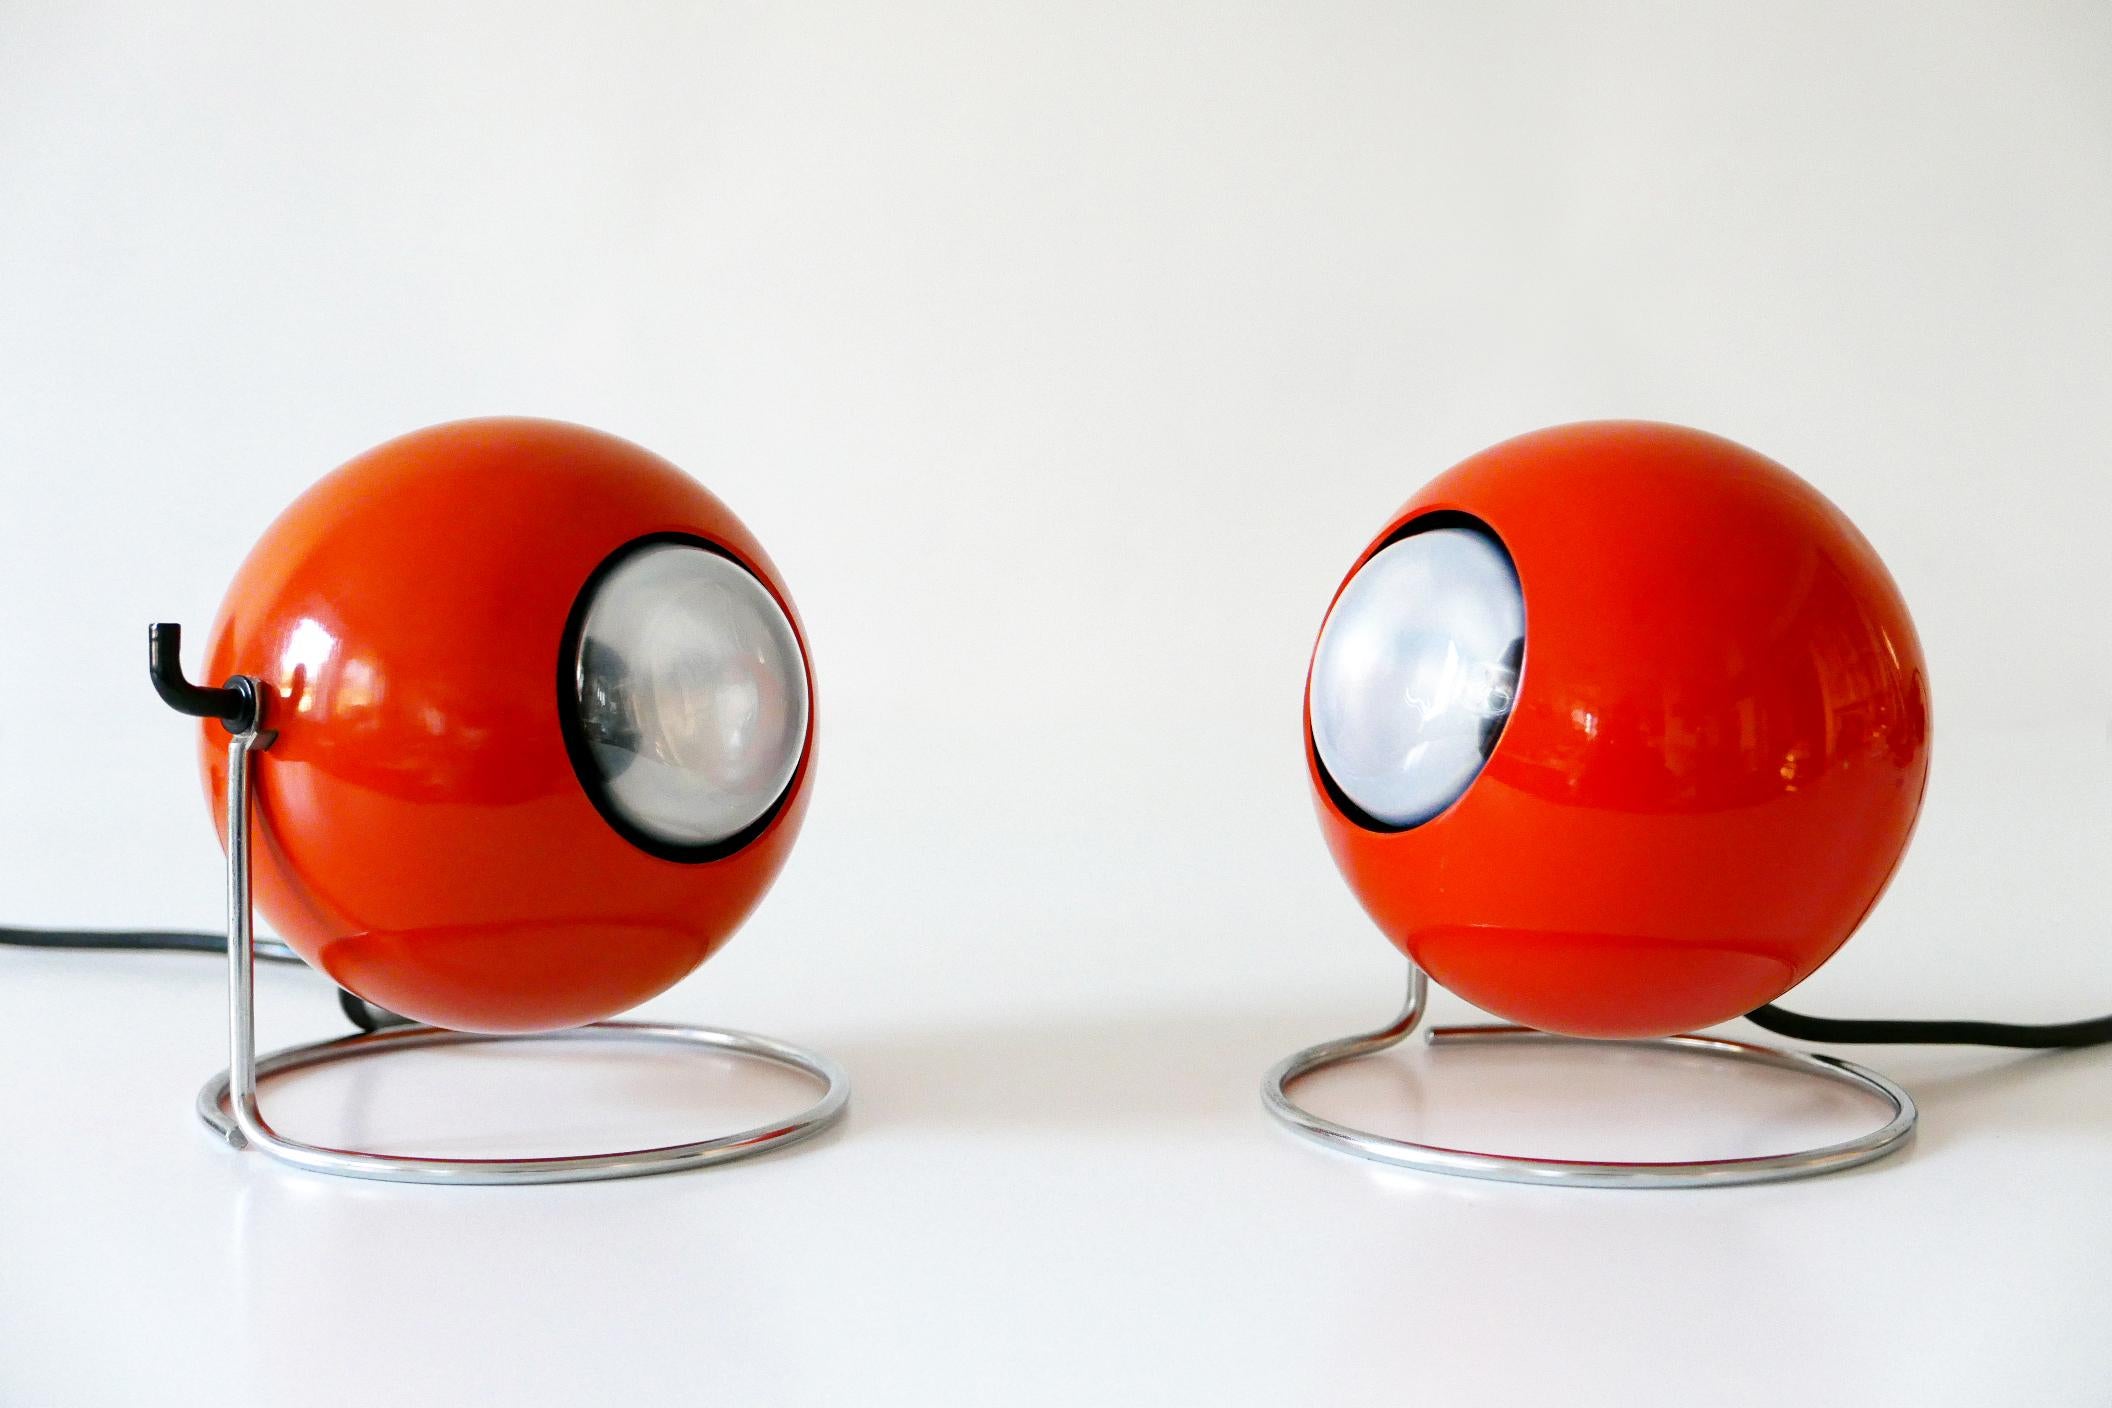 Set of Two Mid-Century Modern Metal 'Eye' Table Lamps, ERCO, 1960s-1970s Germany For Sale 1